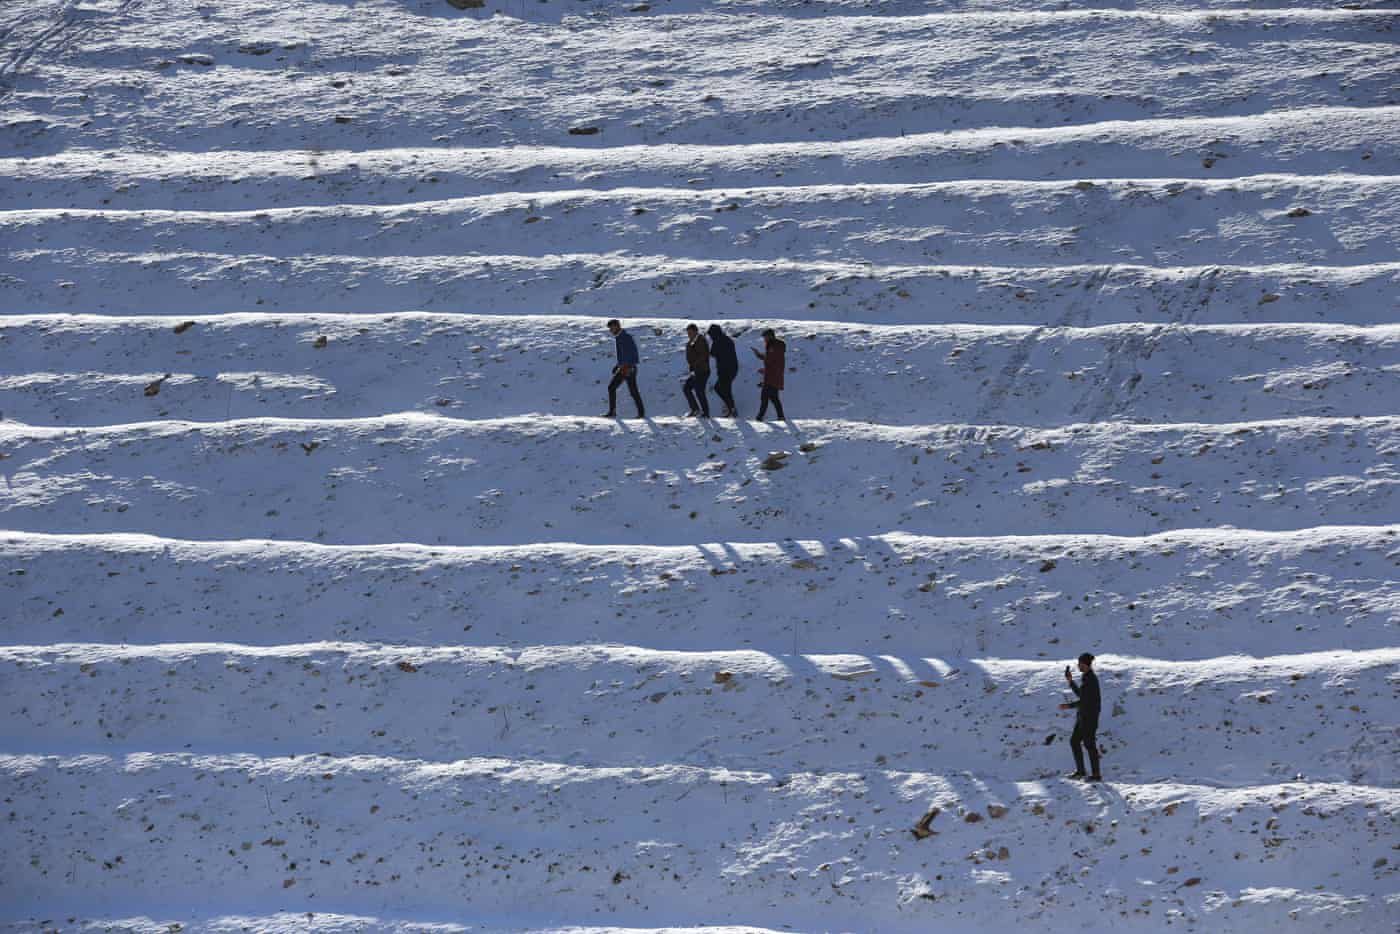 People walk across the snow after a snowfall in